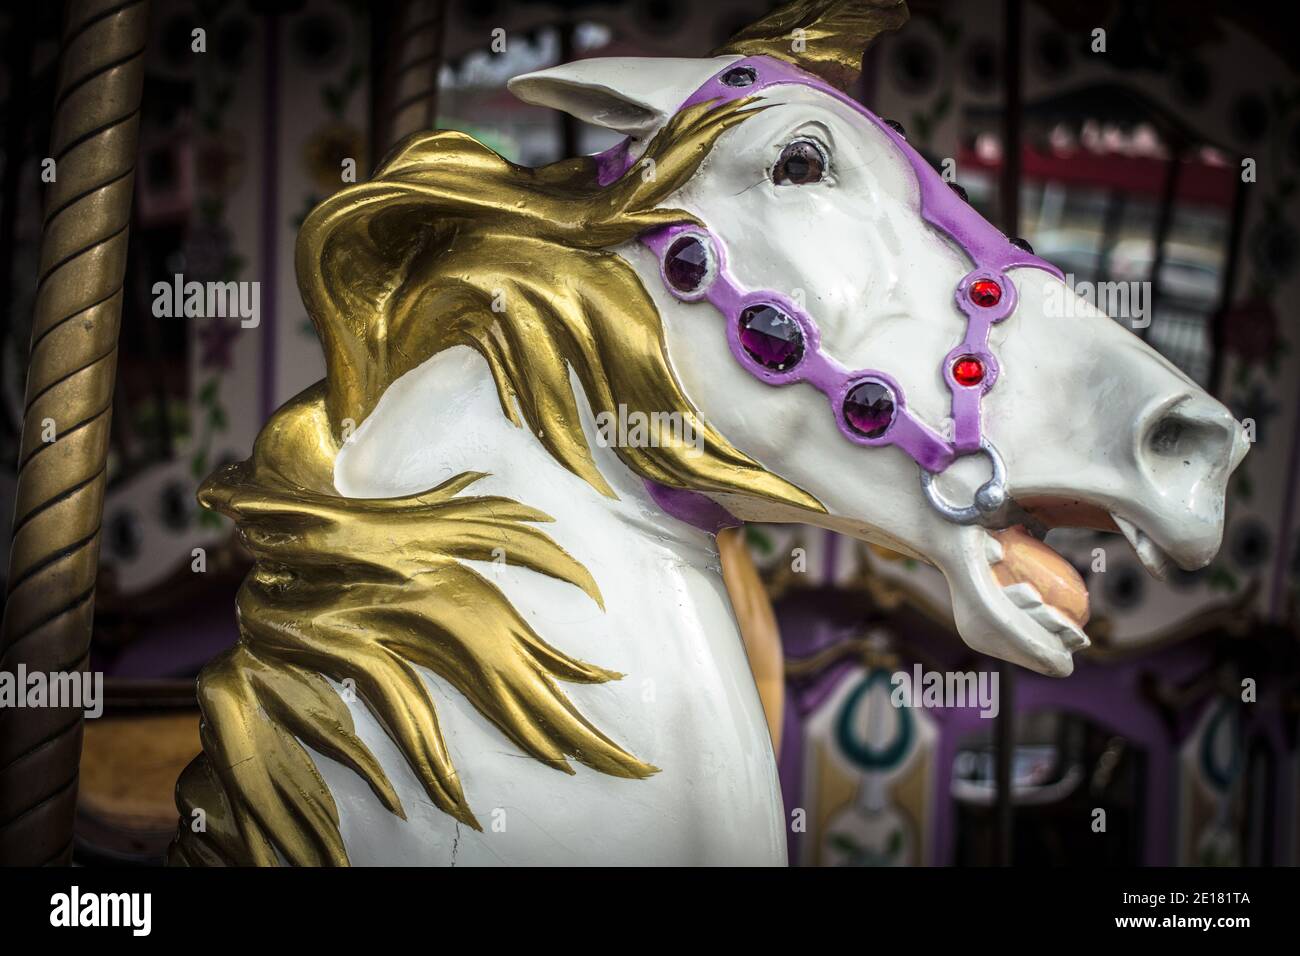 Close up of a antique carousel horse on a merry go round. Stock Photo